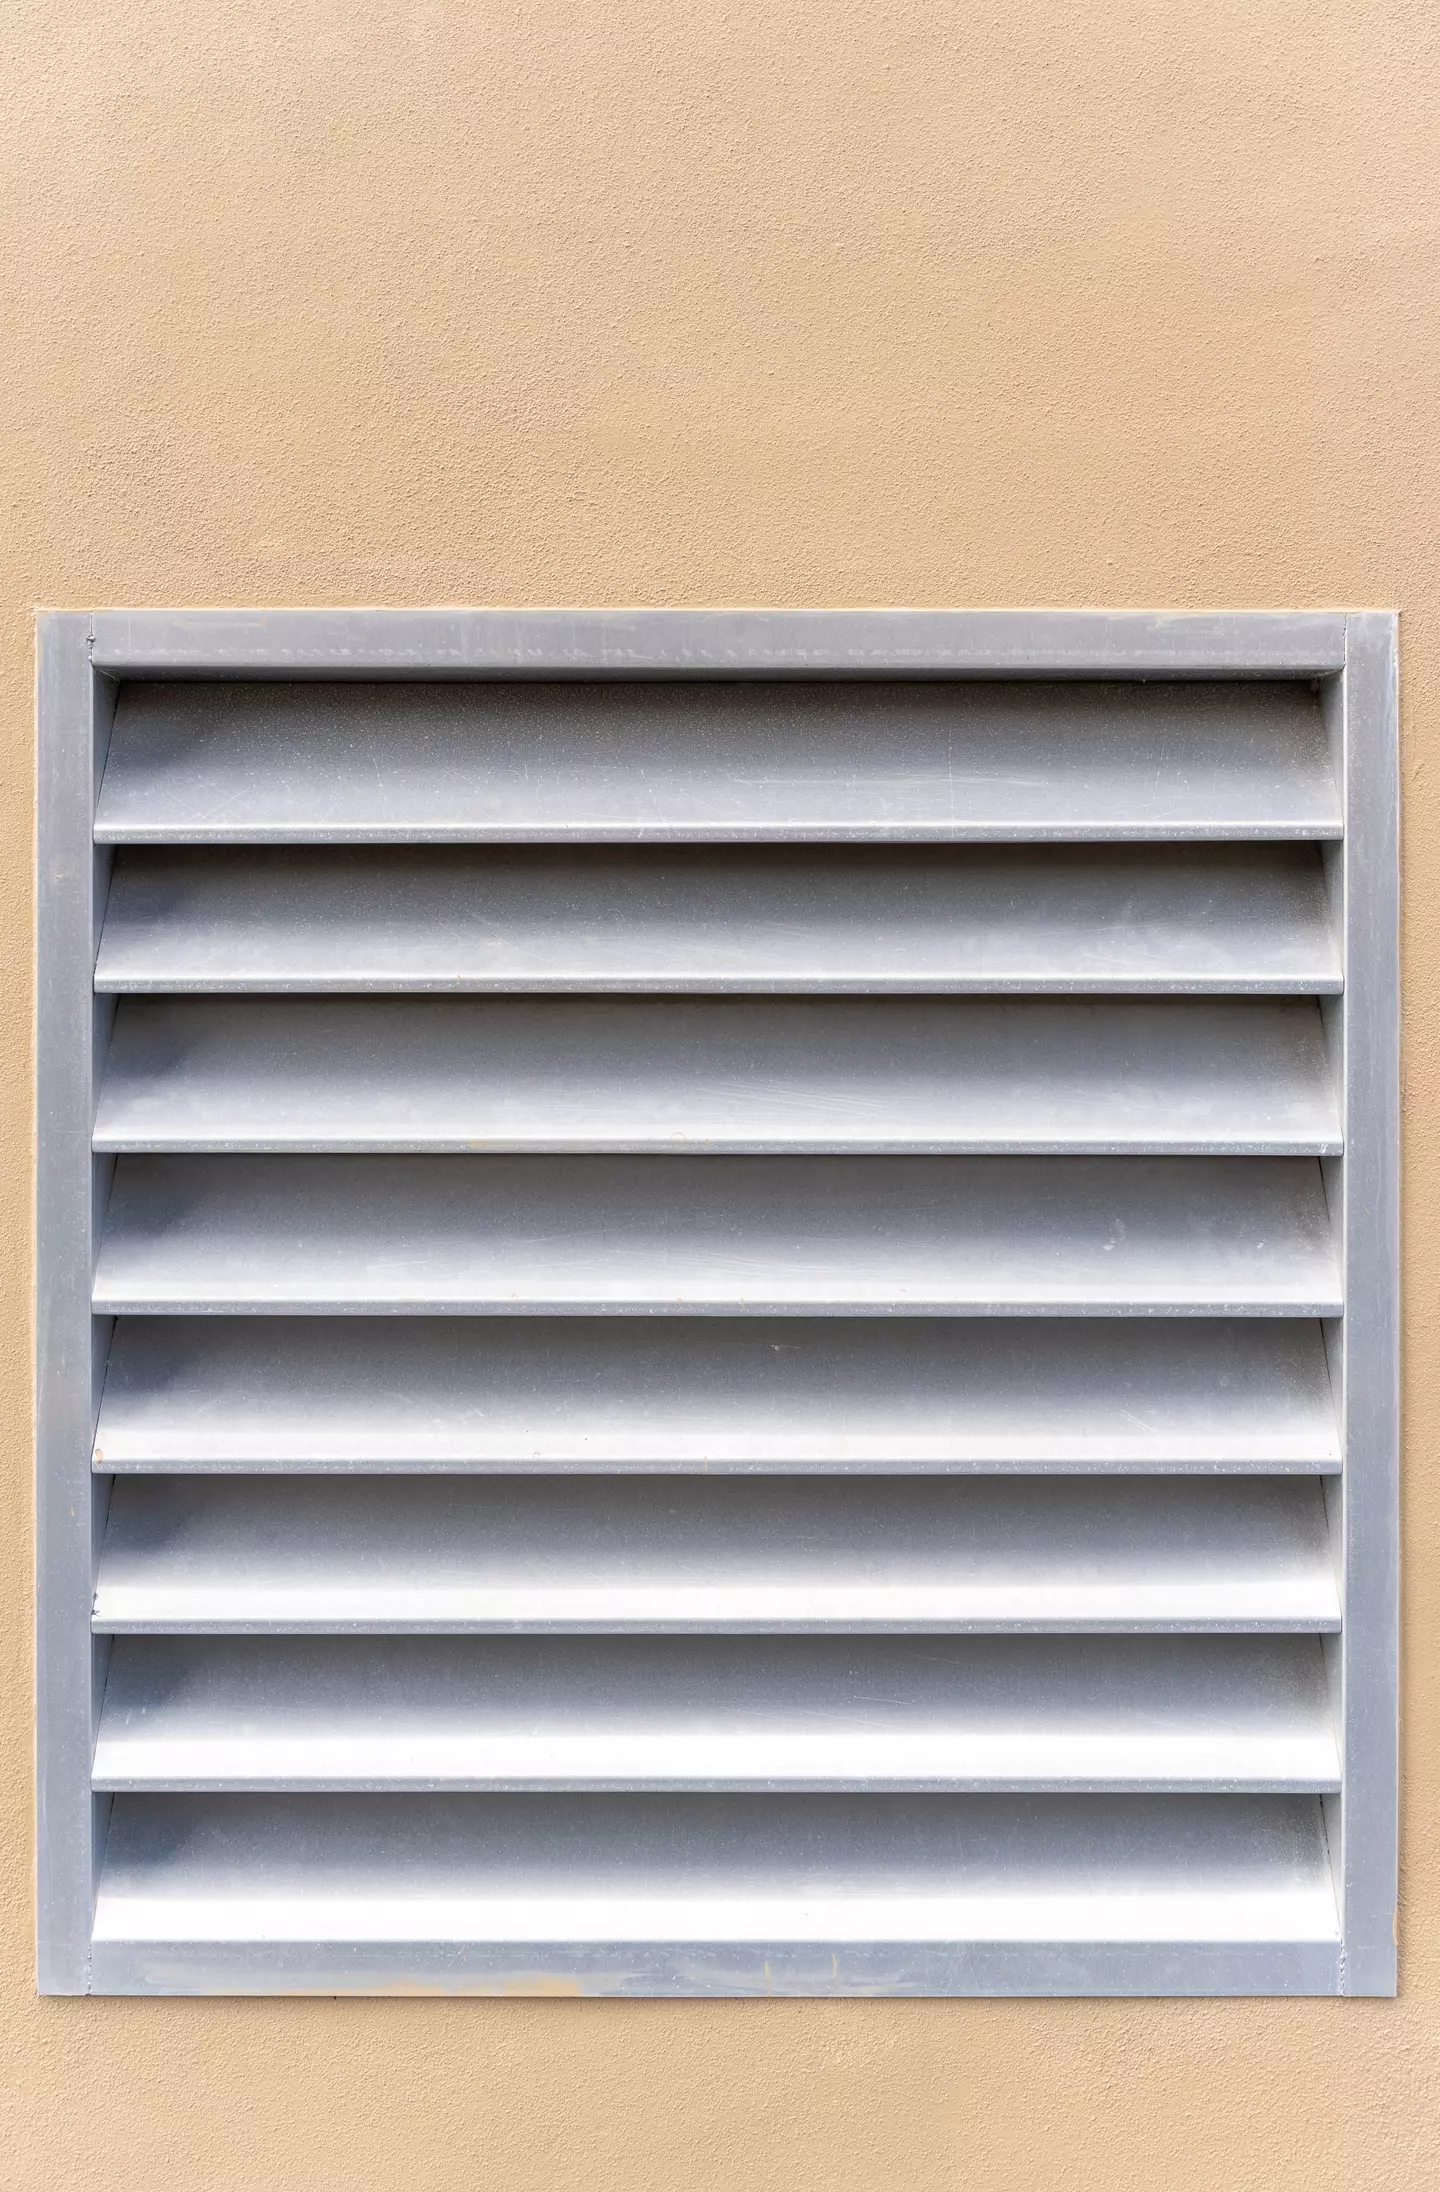 Vents are a popular place for dirt to hide.